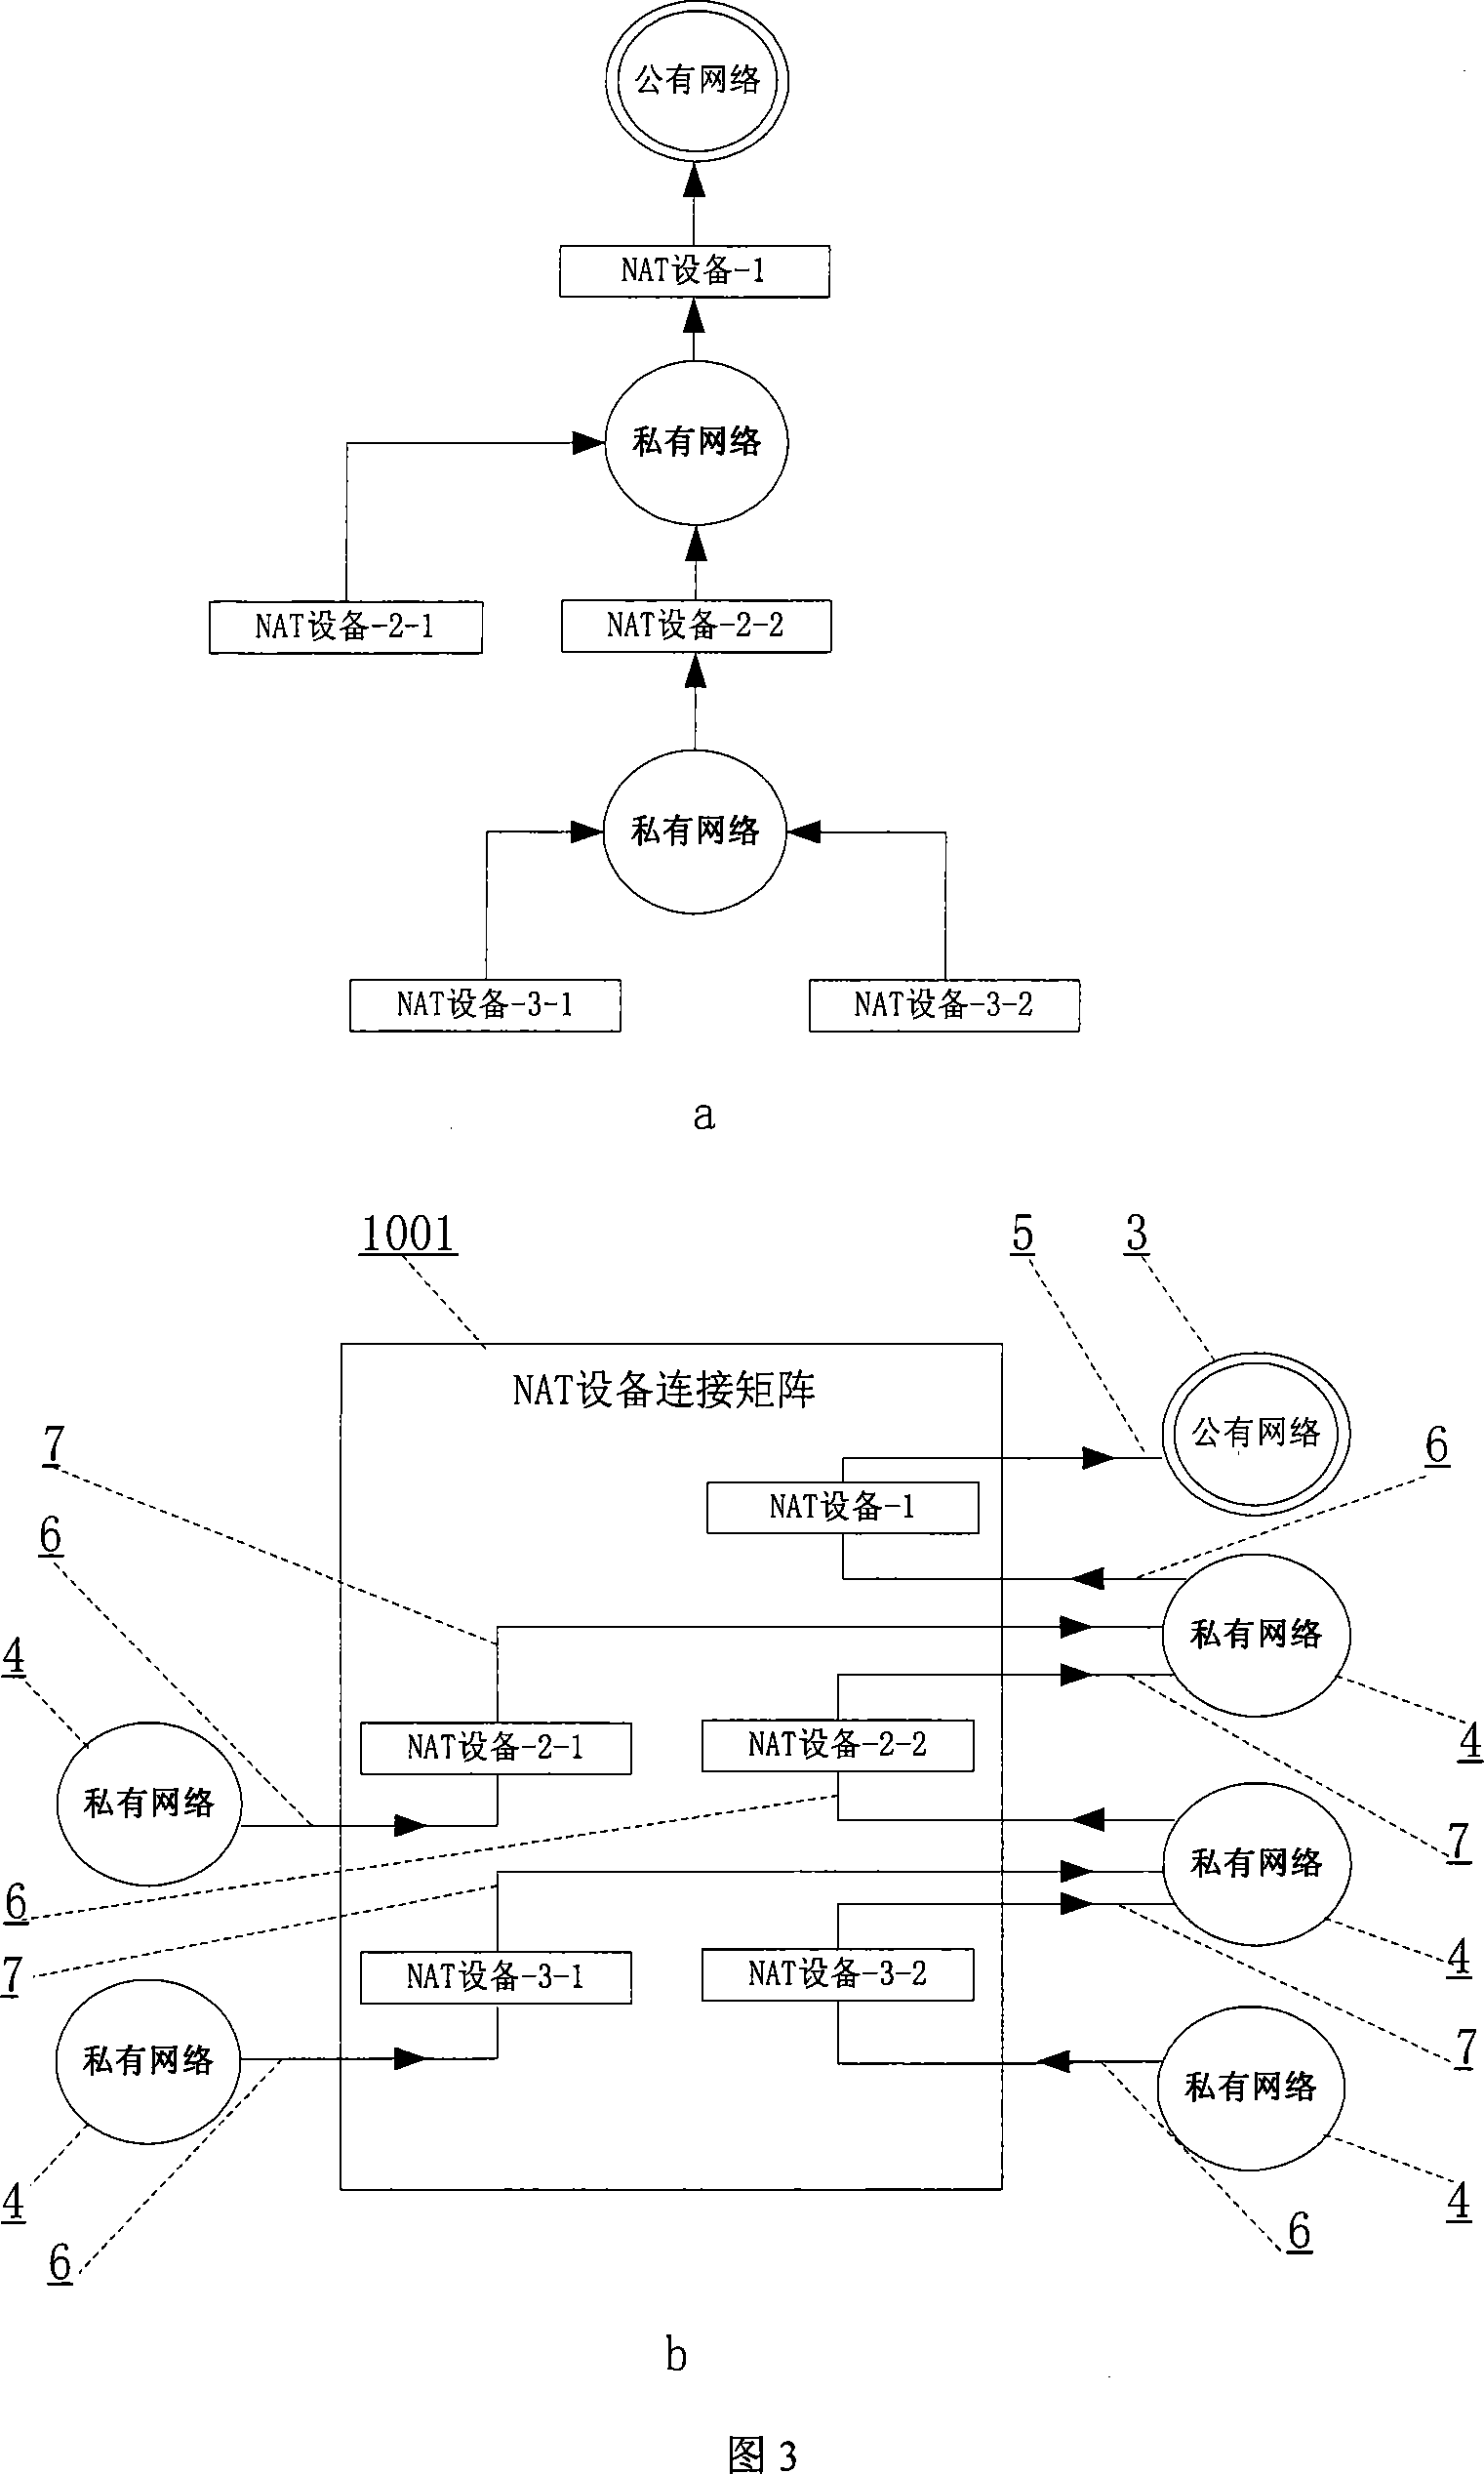 Application-oriented name registration system and its service method under multi-layer NAT environment